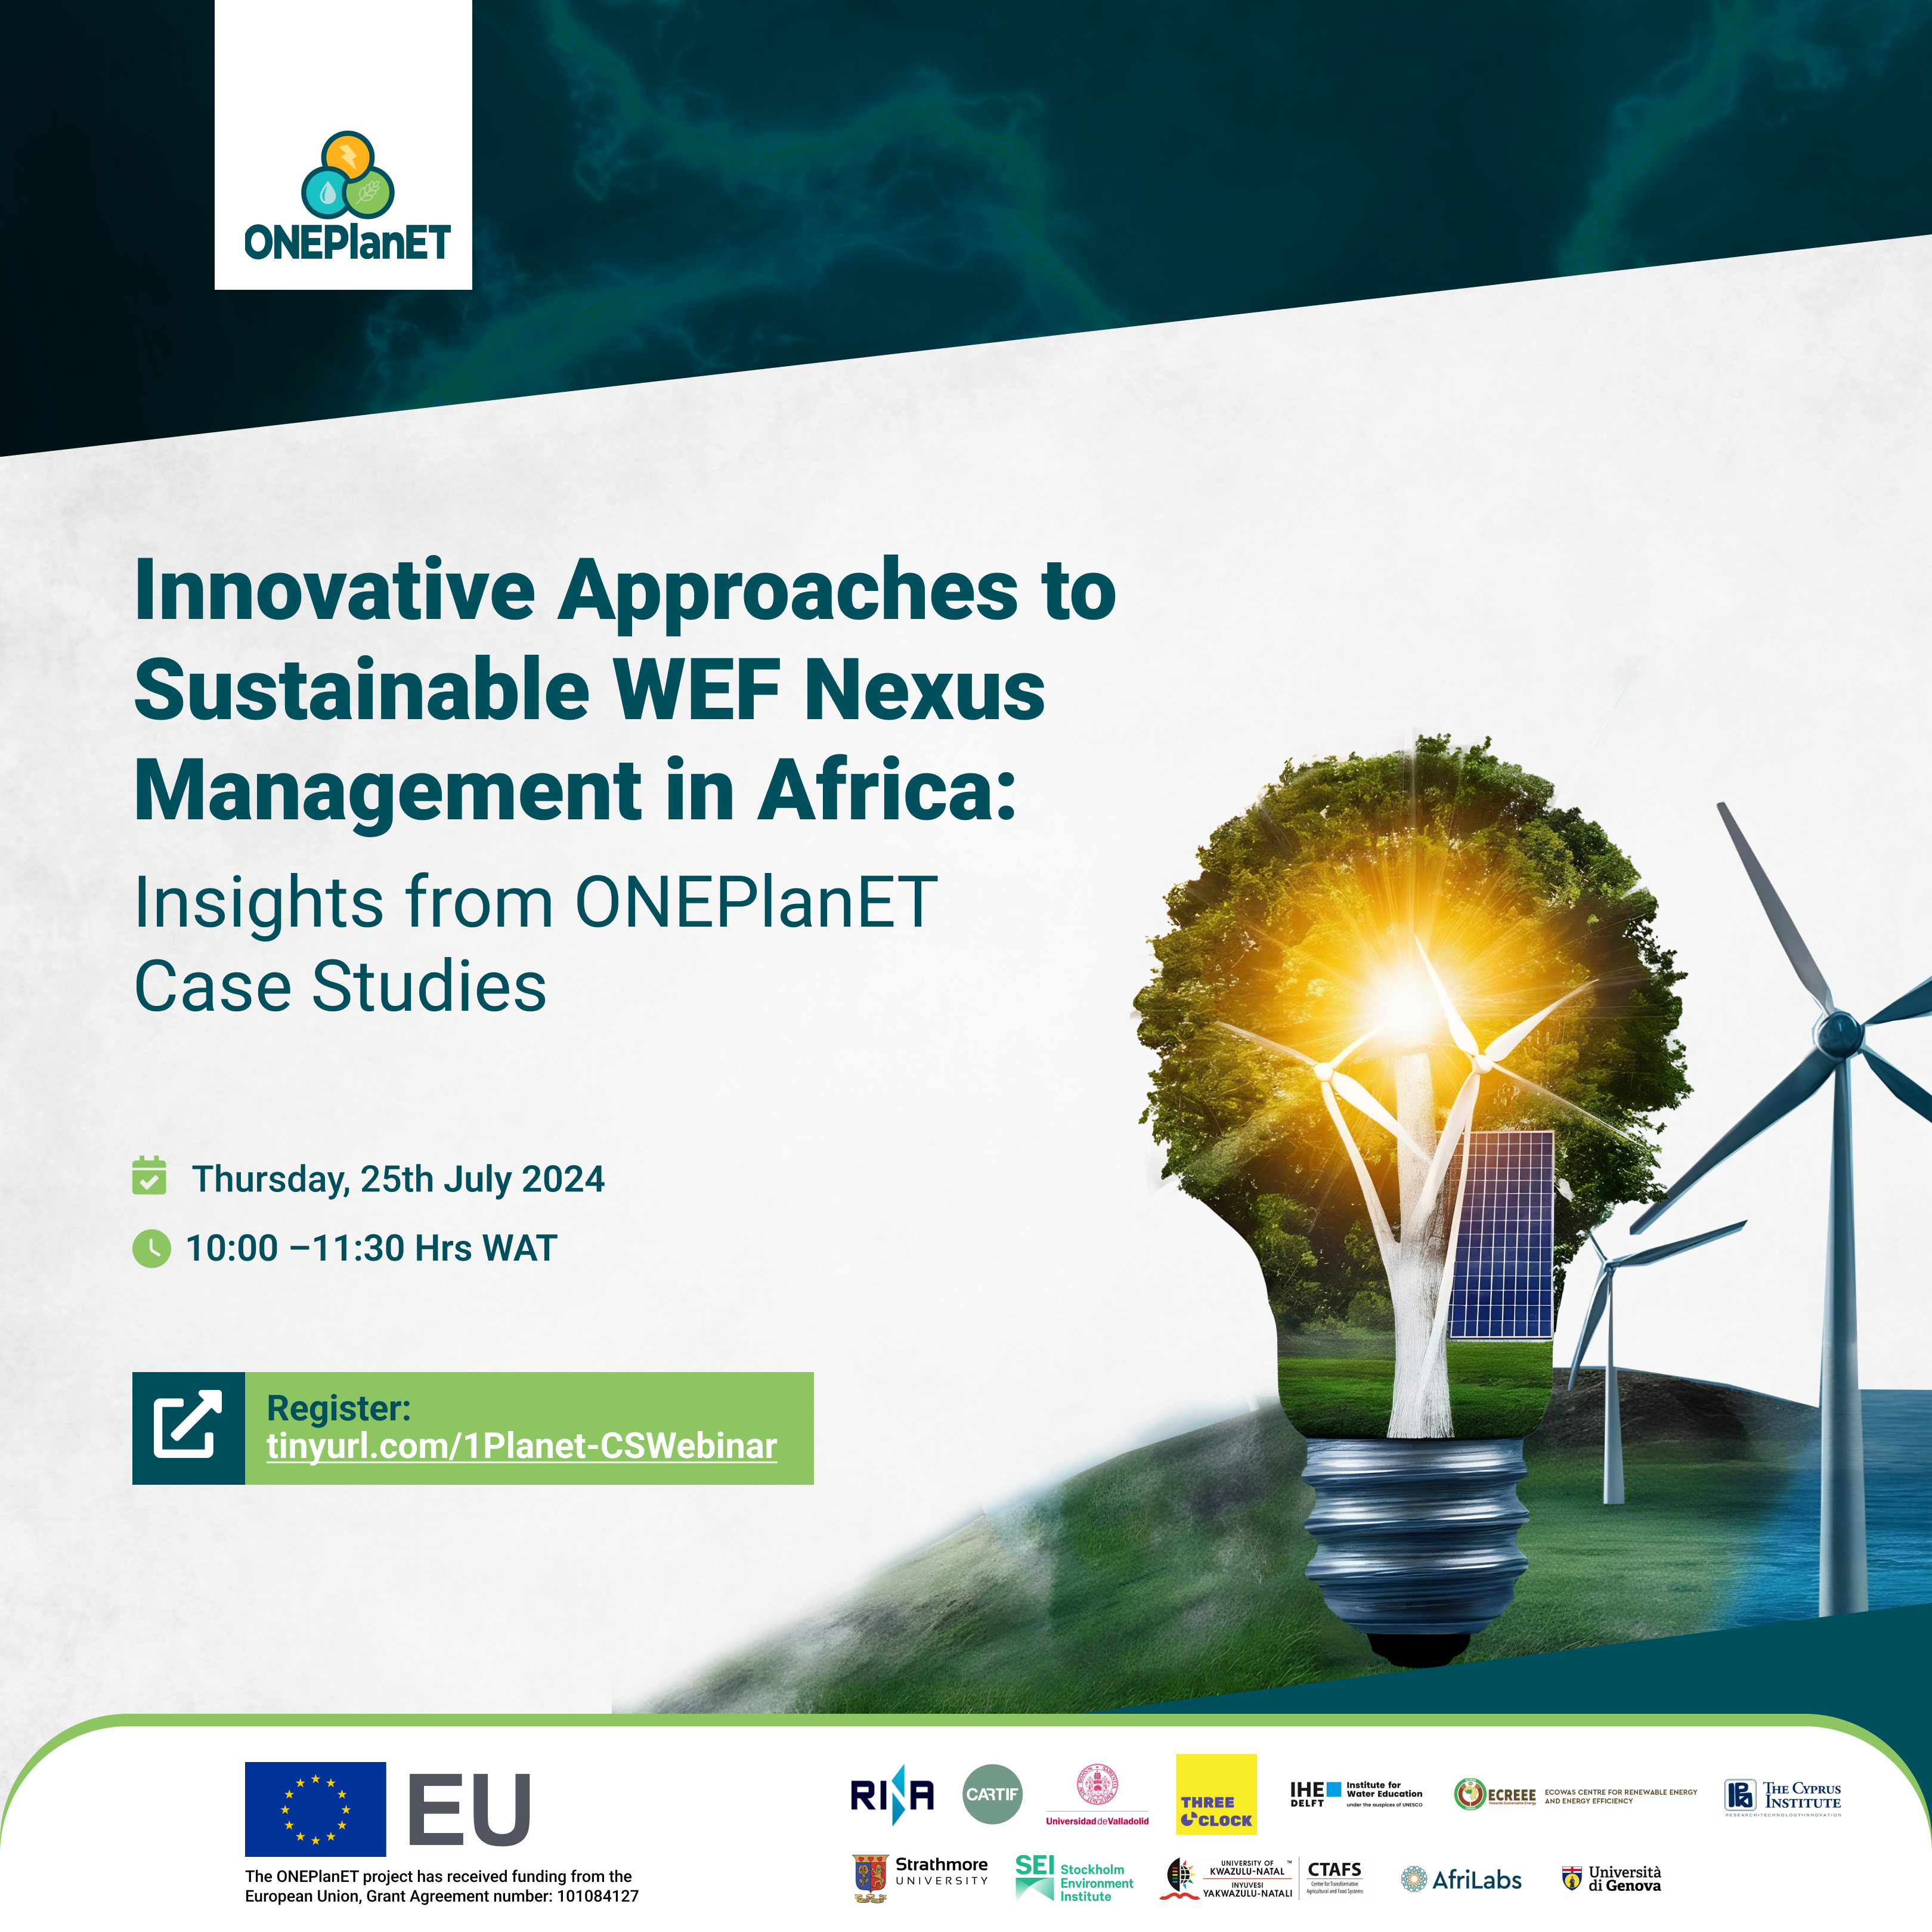 Join the ONEPlanET Webinar on Sustainable WEF Nexus Management in Africa